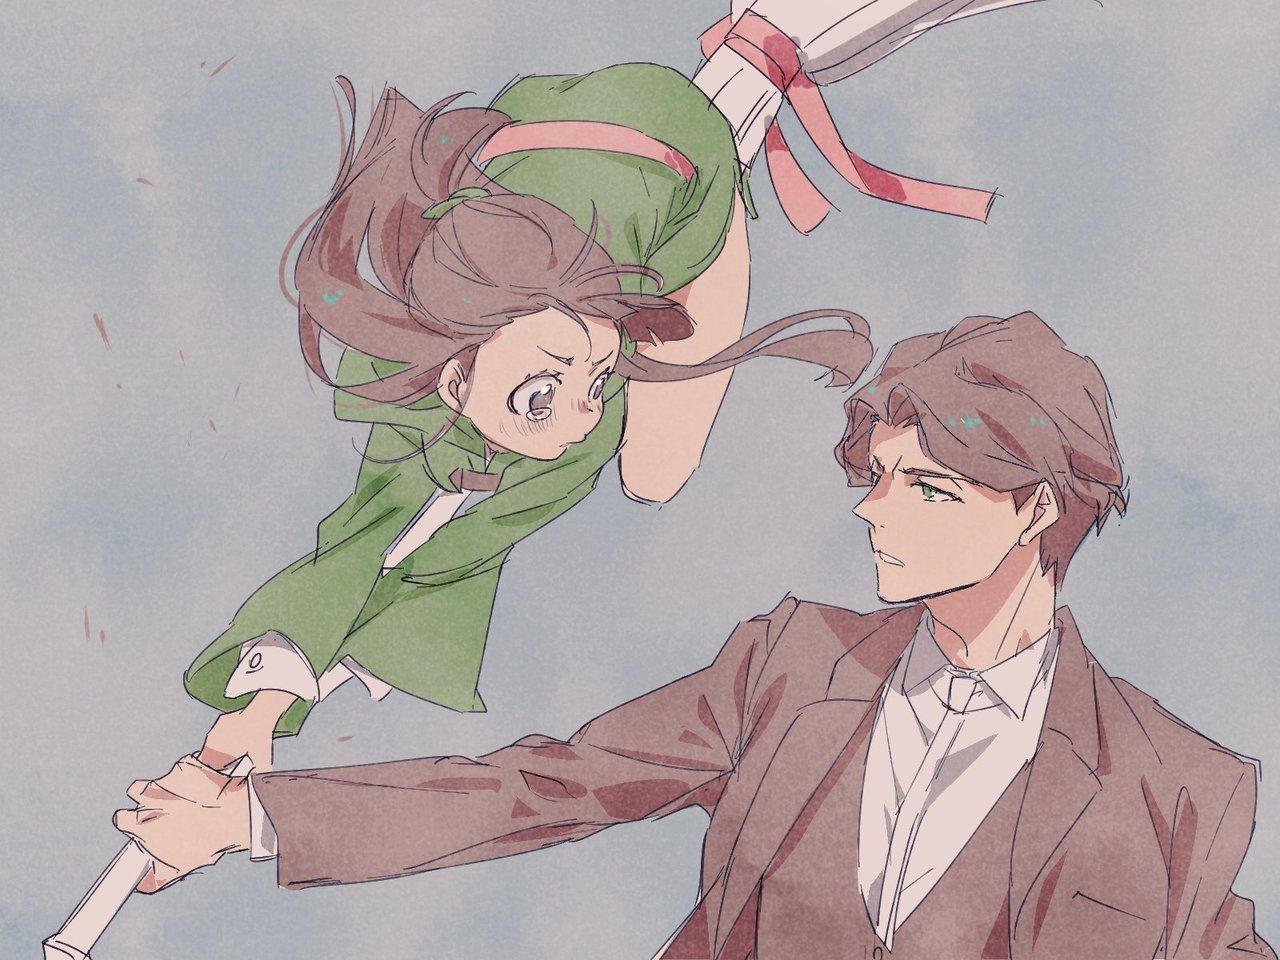 image about Akko and Andrew. See more about little witch academia, anime and akko x andrew